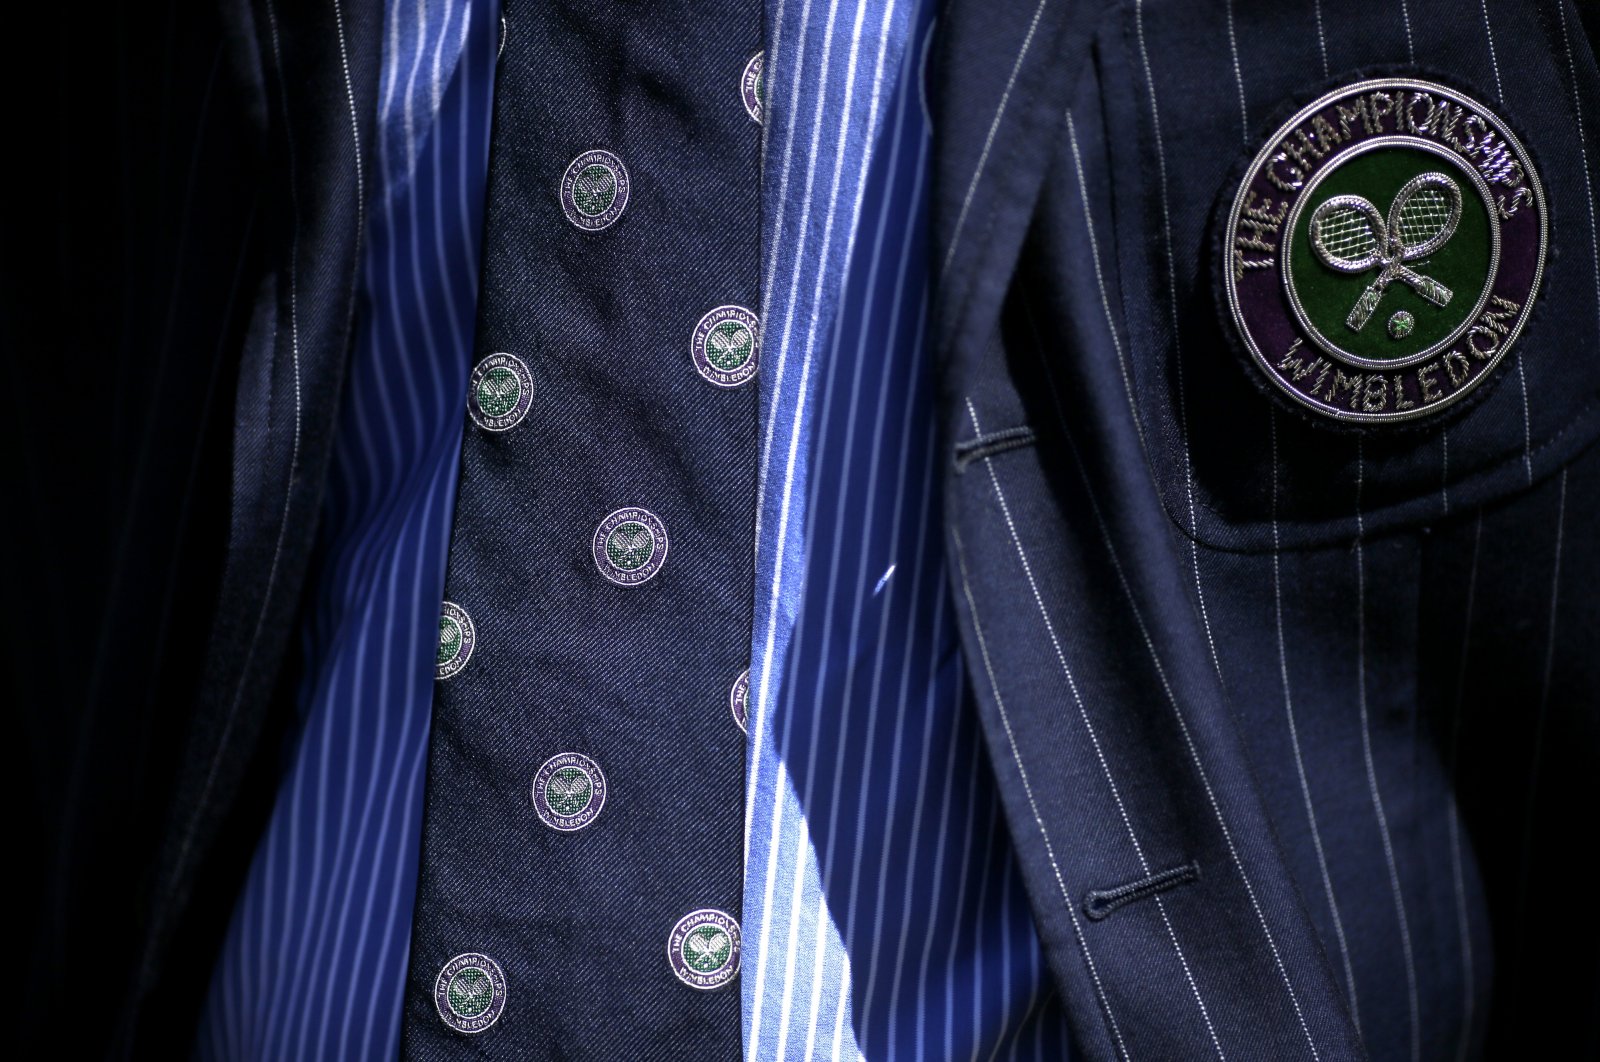 The umpire&#039;s tie and jacket display the logo of the Wimbledon Championships, London, England, July 2, 2018. (AP Photo)